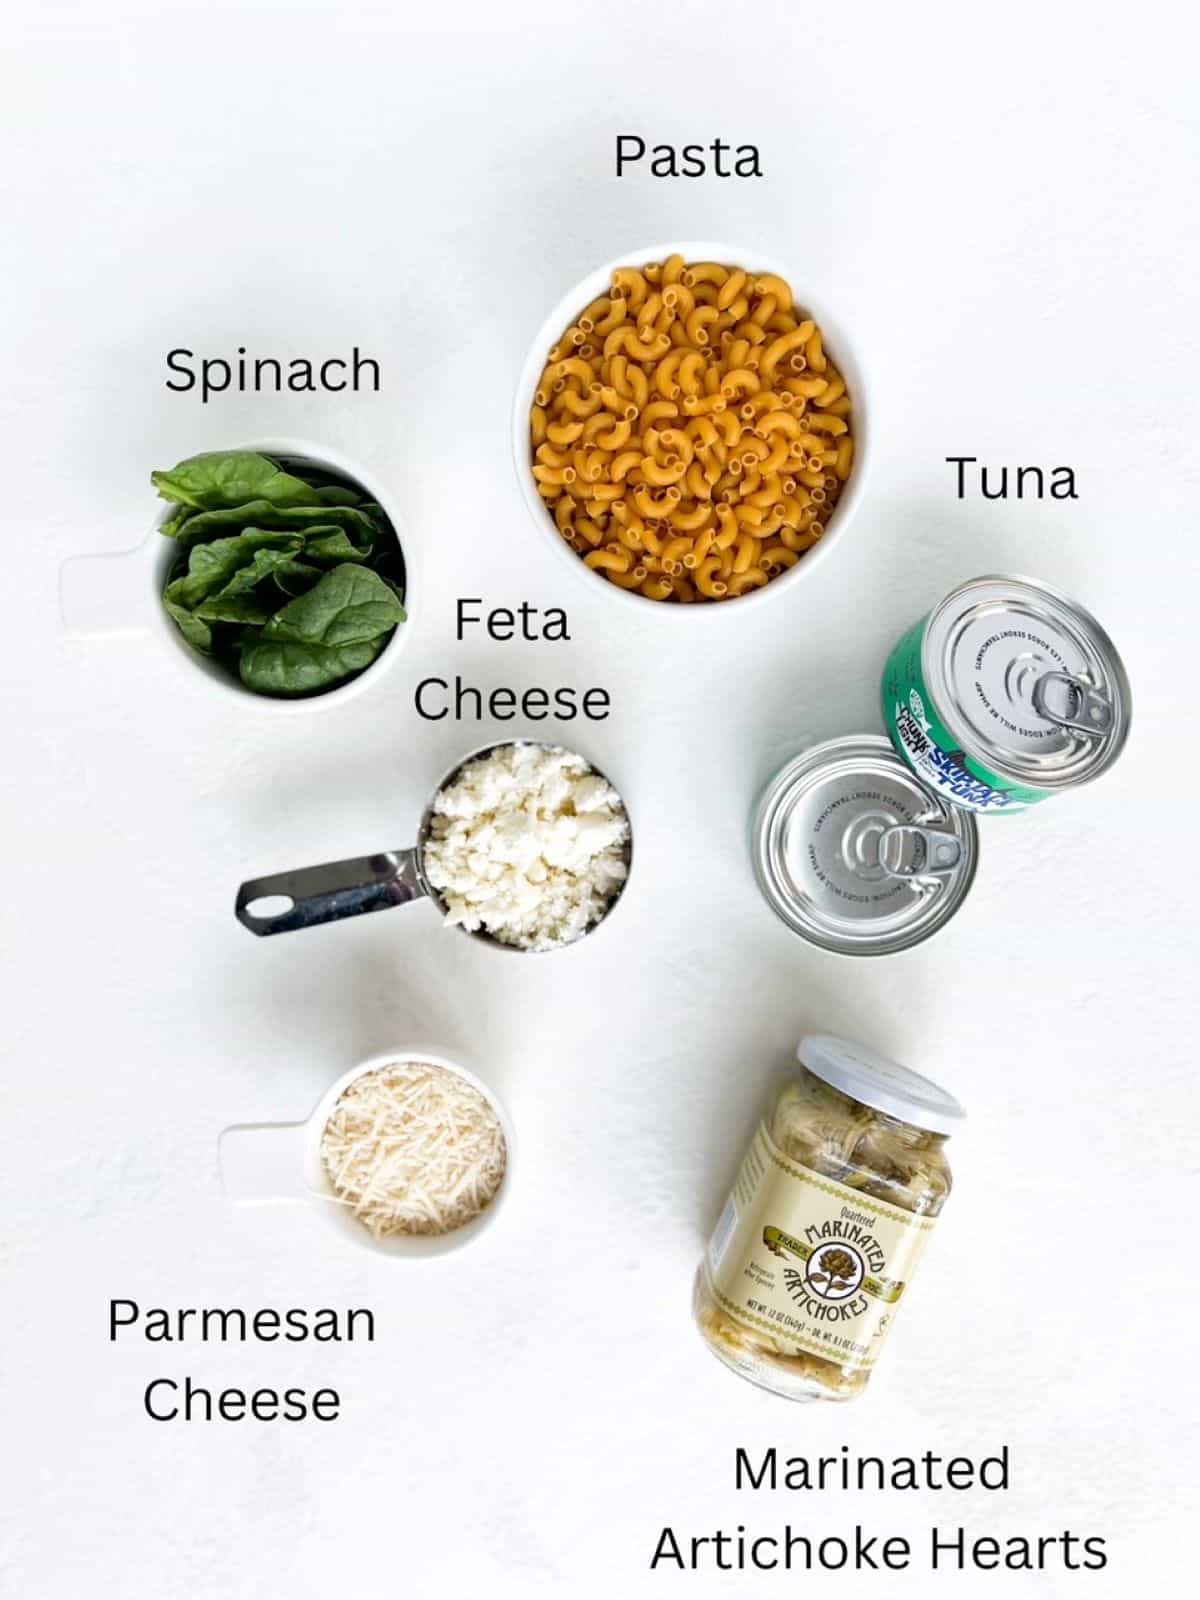 Ingredients for Pasta with Tuna recipe, labeled.